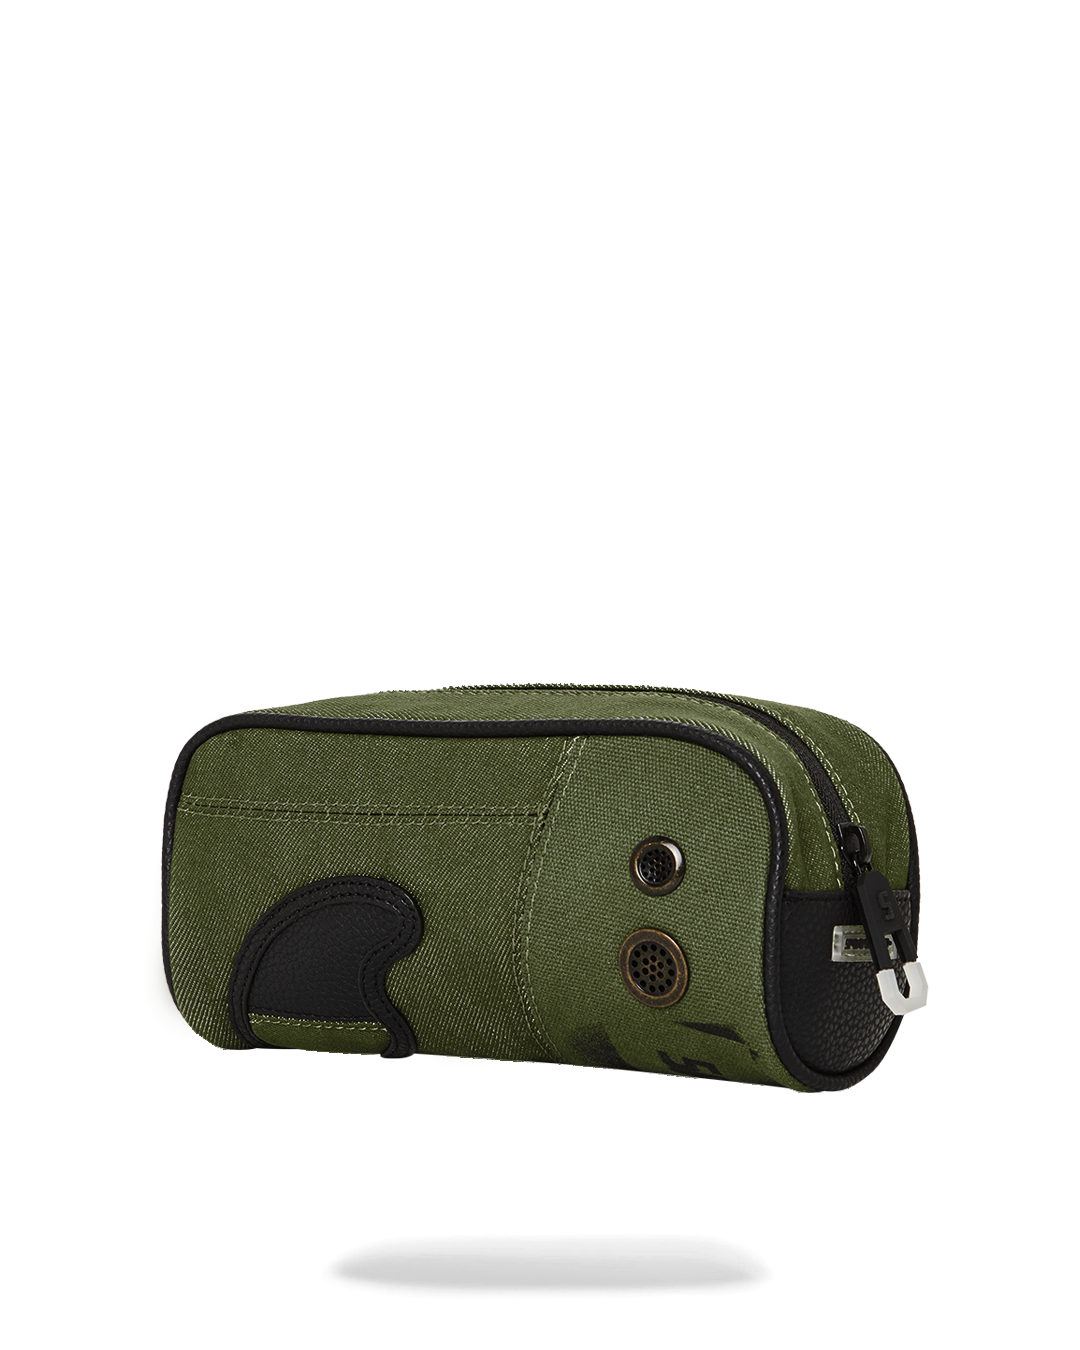 SPRAYGROUND® POUCH SPECIAL OPS OPERATION SUCCE$$ POUCH